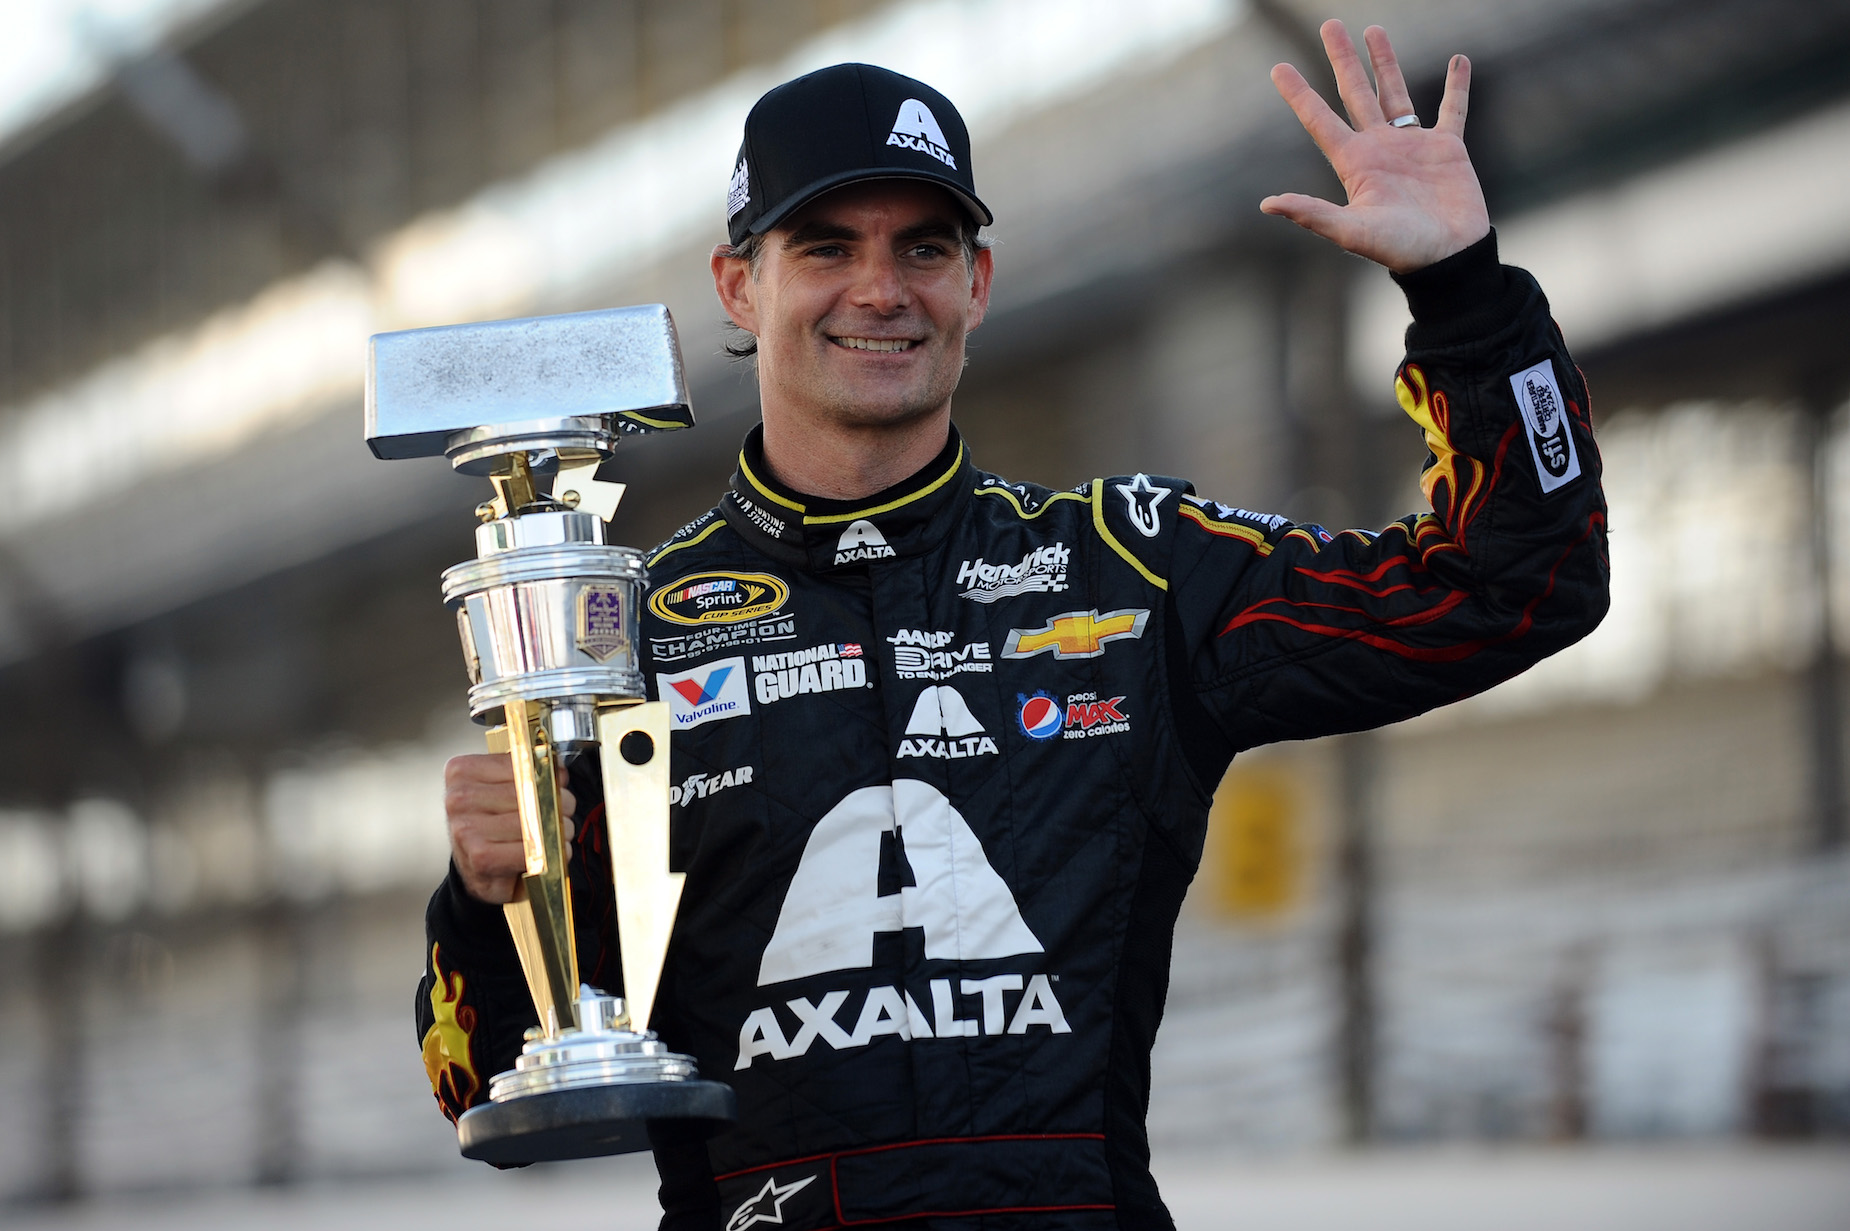 NASCAR legend Jeff Gordon knew a thing or two about seizing oppertunities.